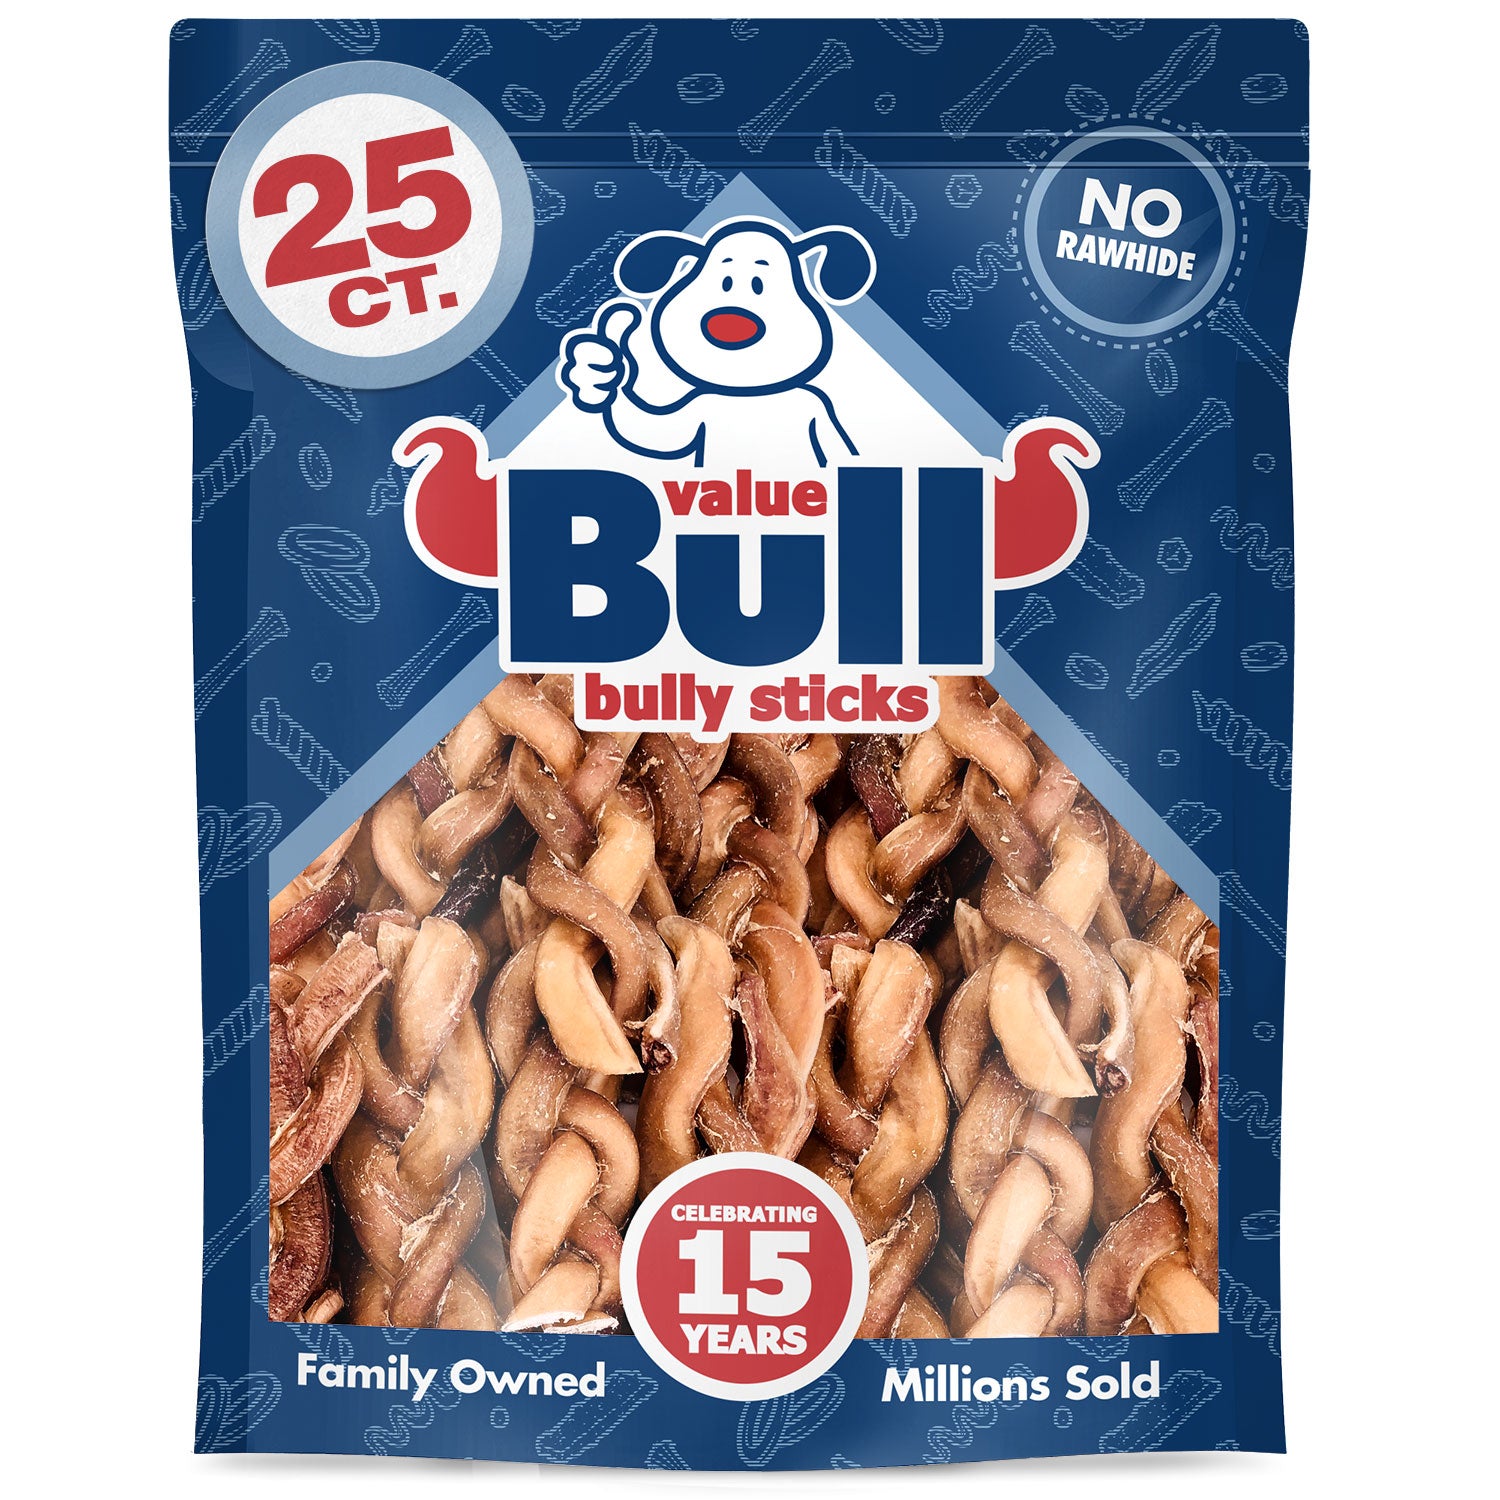 ValueBull Braided Bully Sticks, Thick 6 Inch, 25 Count